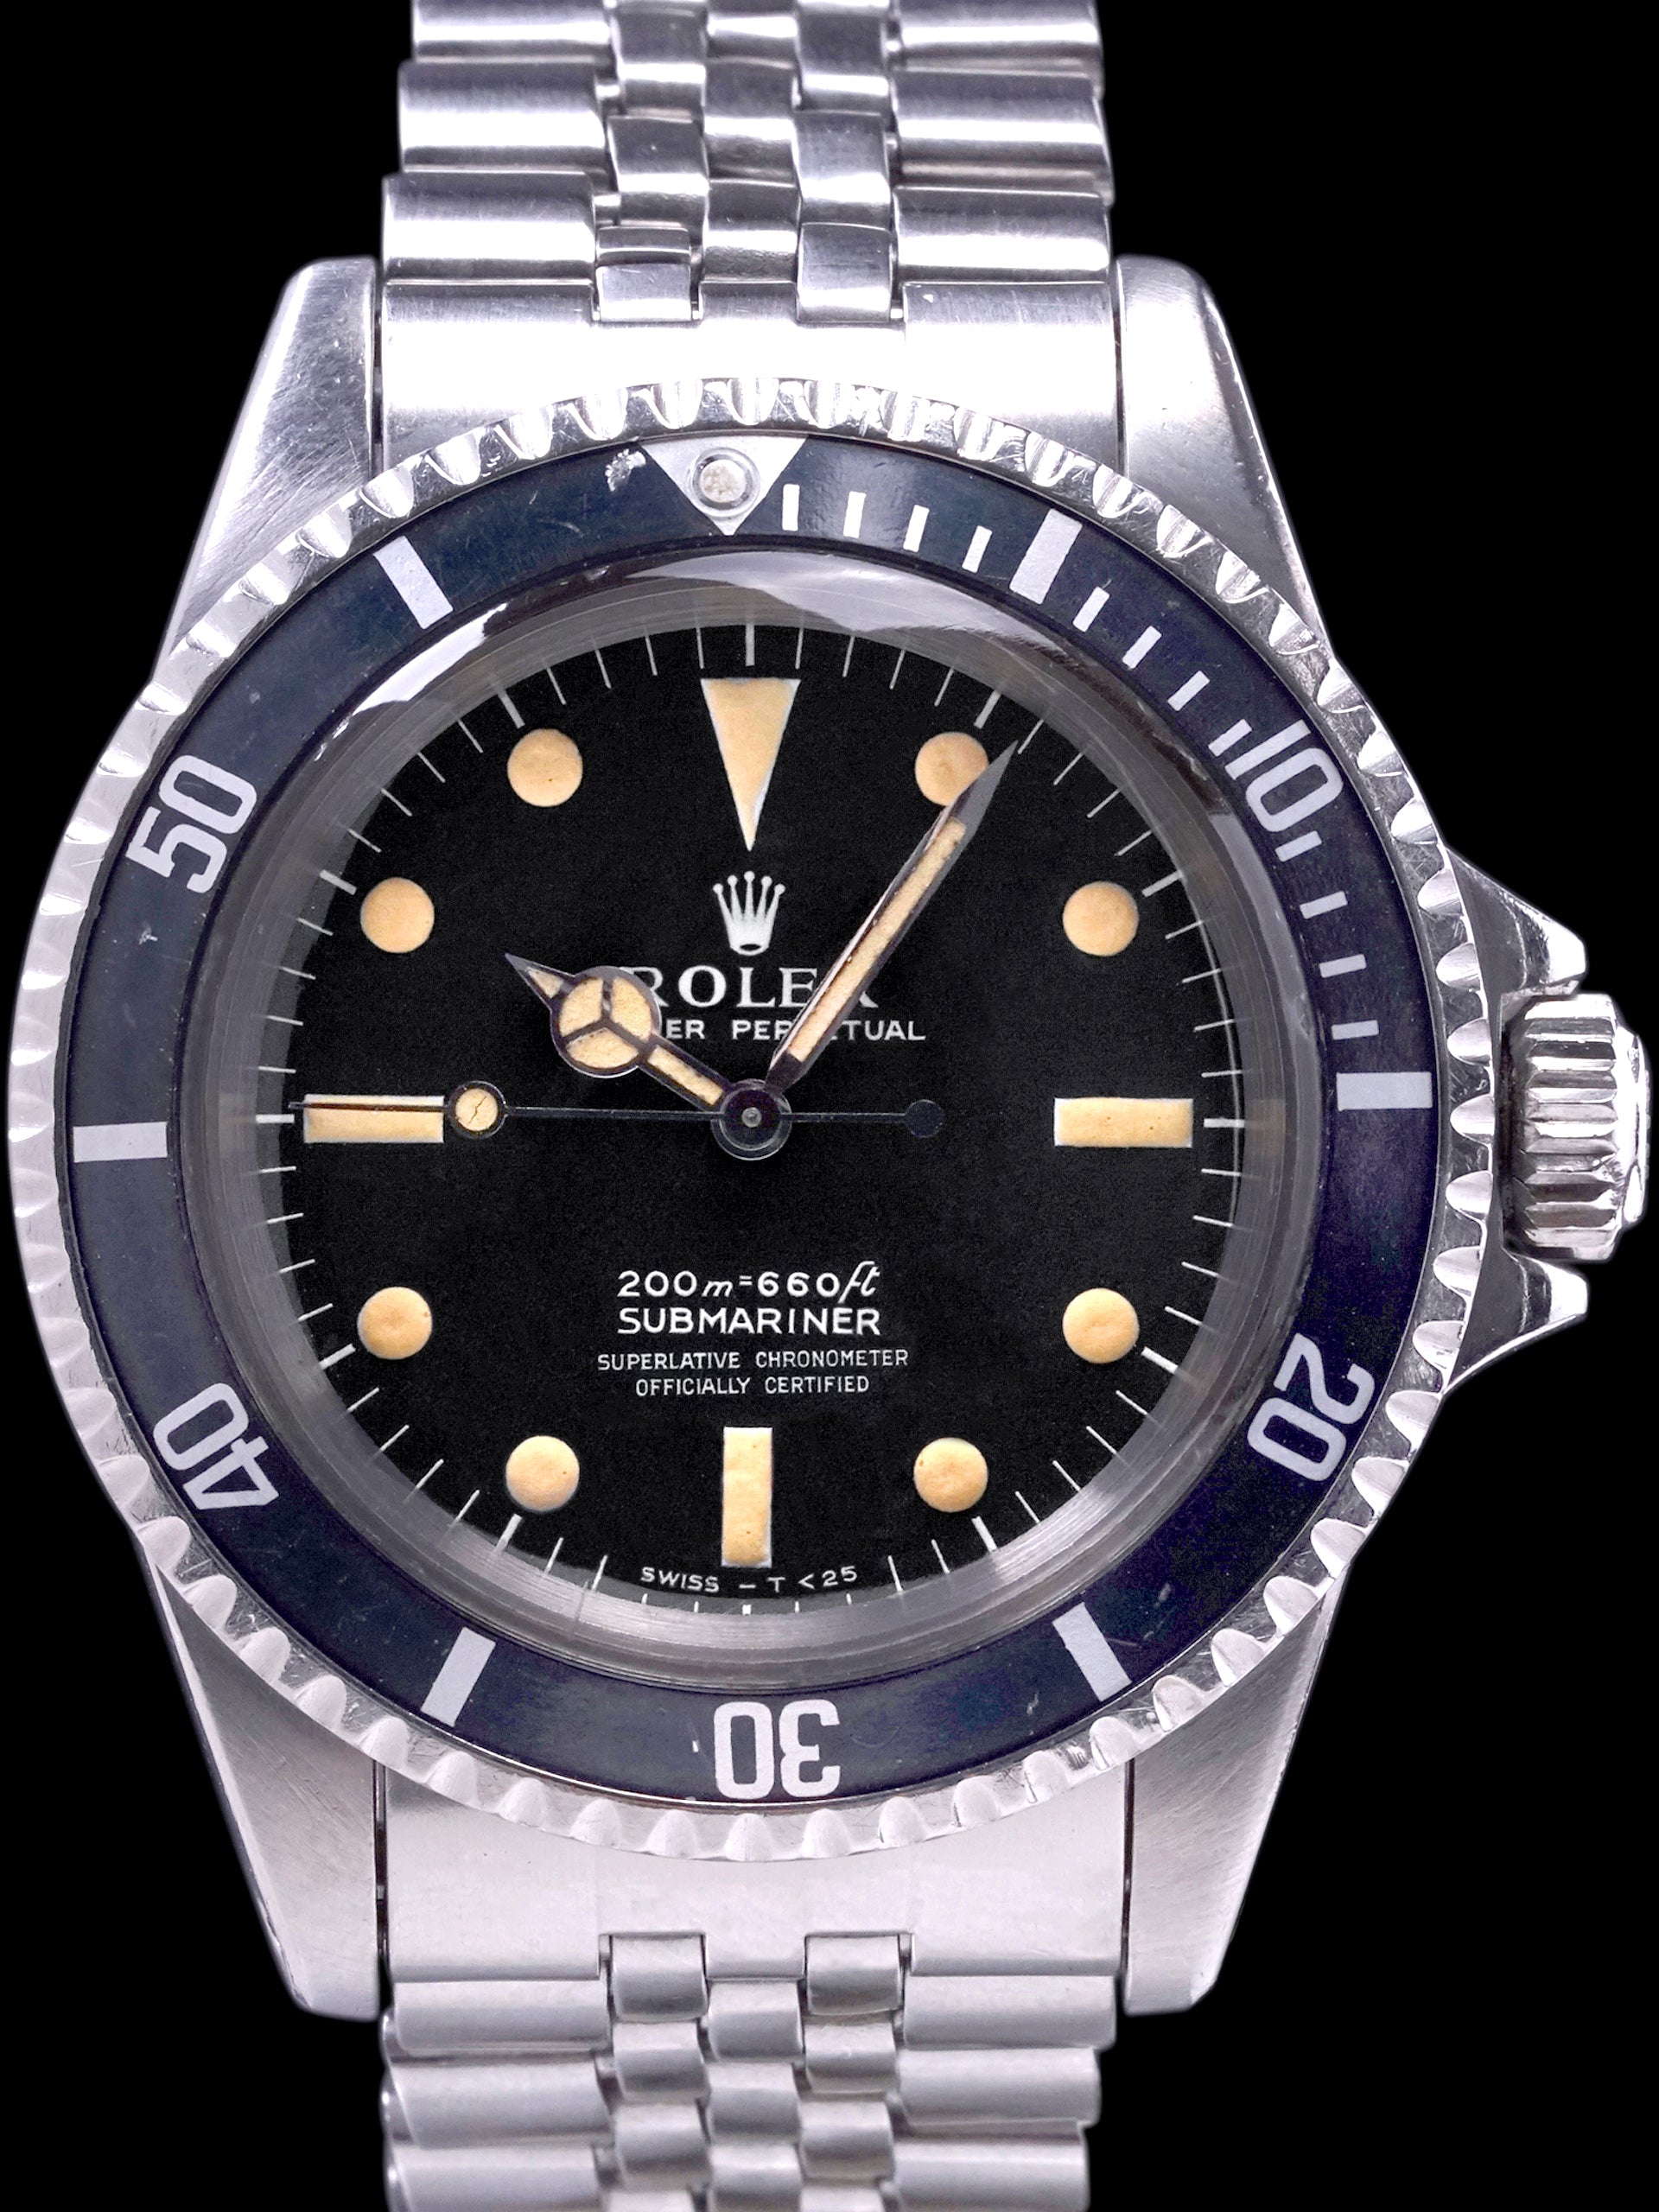 1966 Rolex Submariner (Ref. 5512) "Meters First" W/ Box & Double Punched Papers